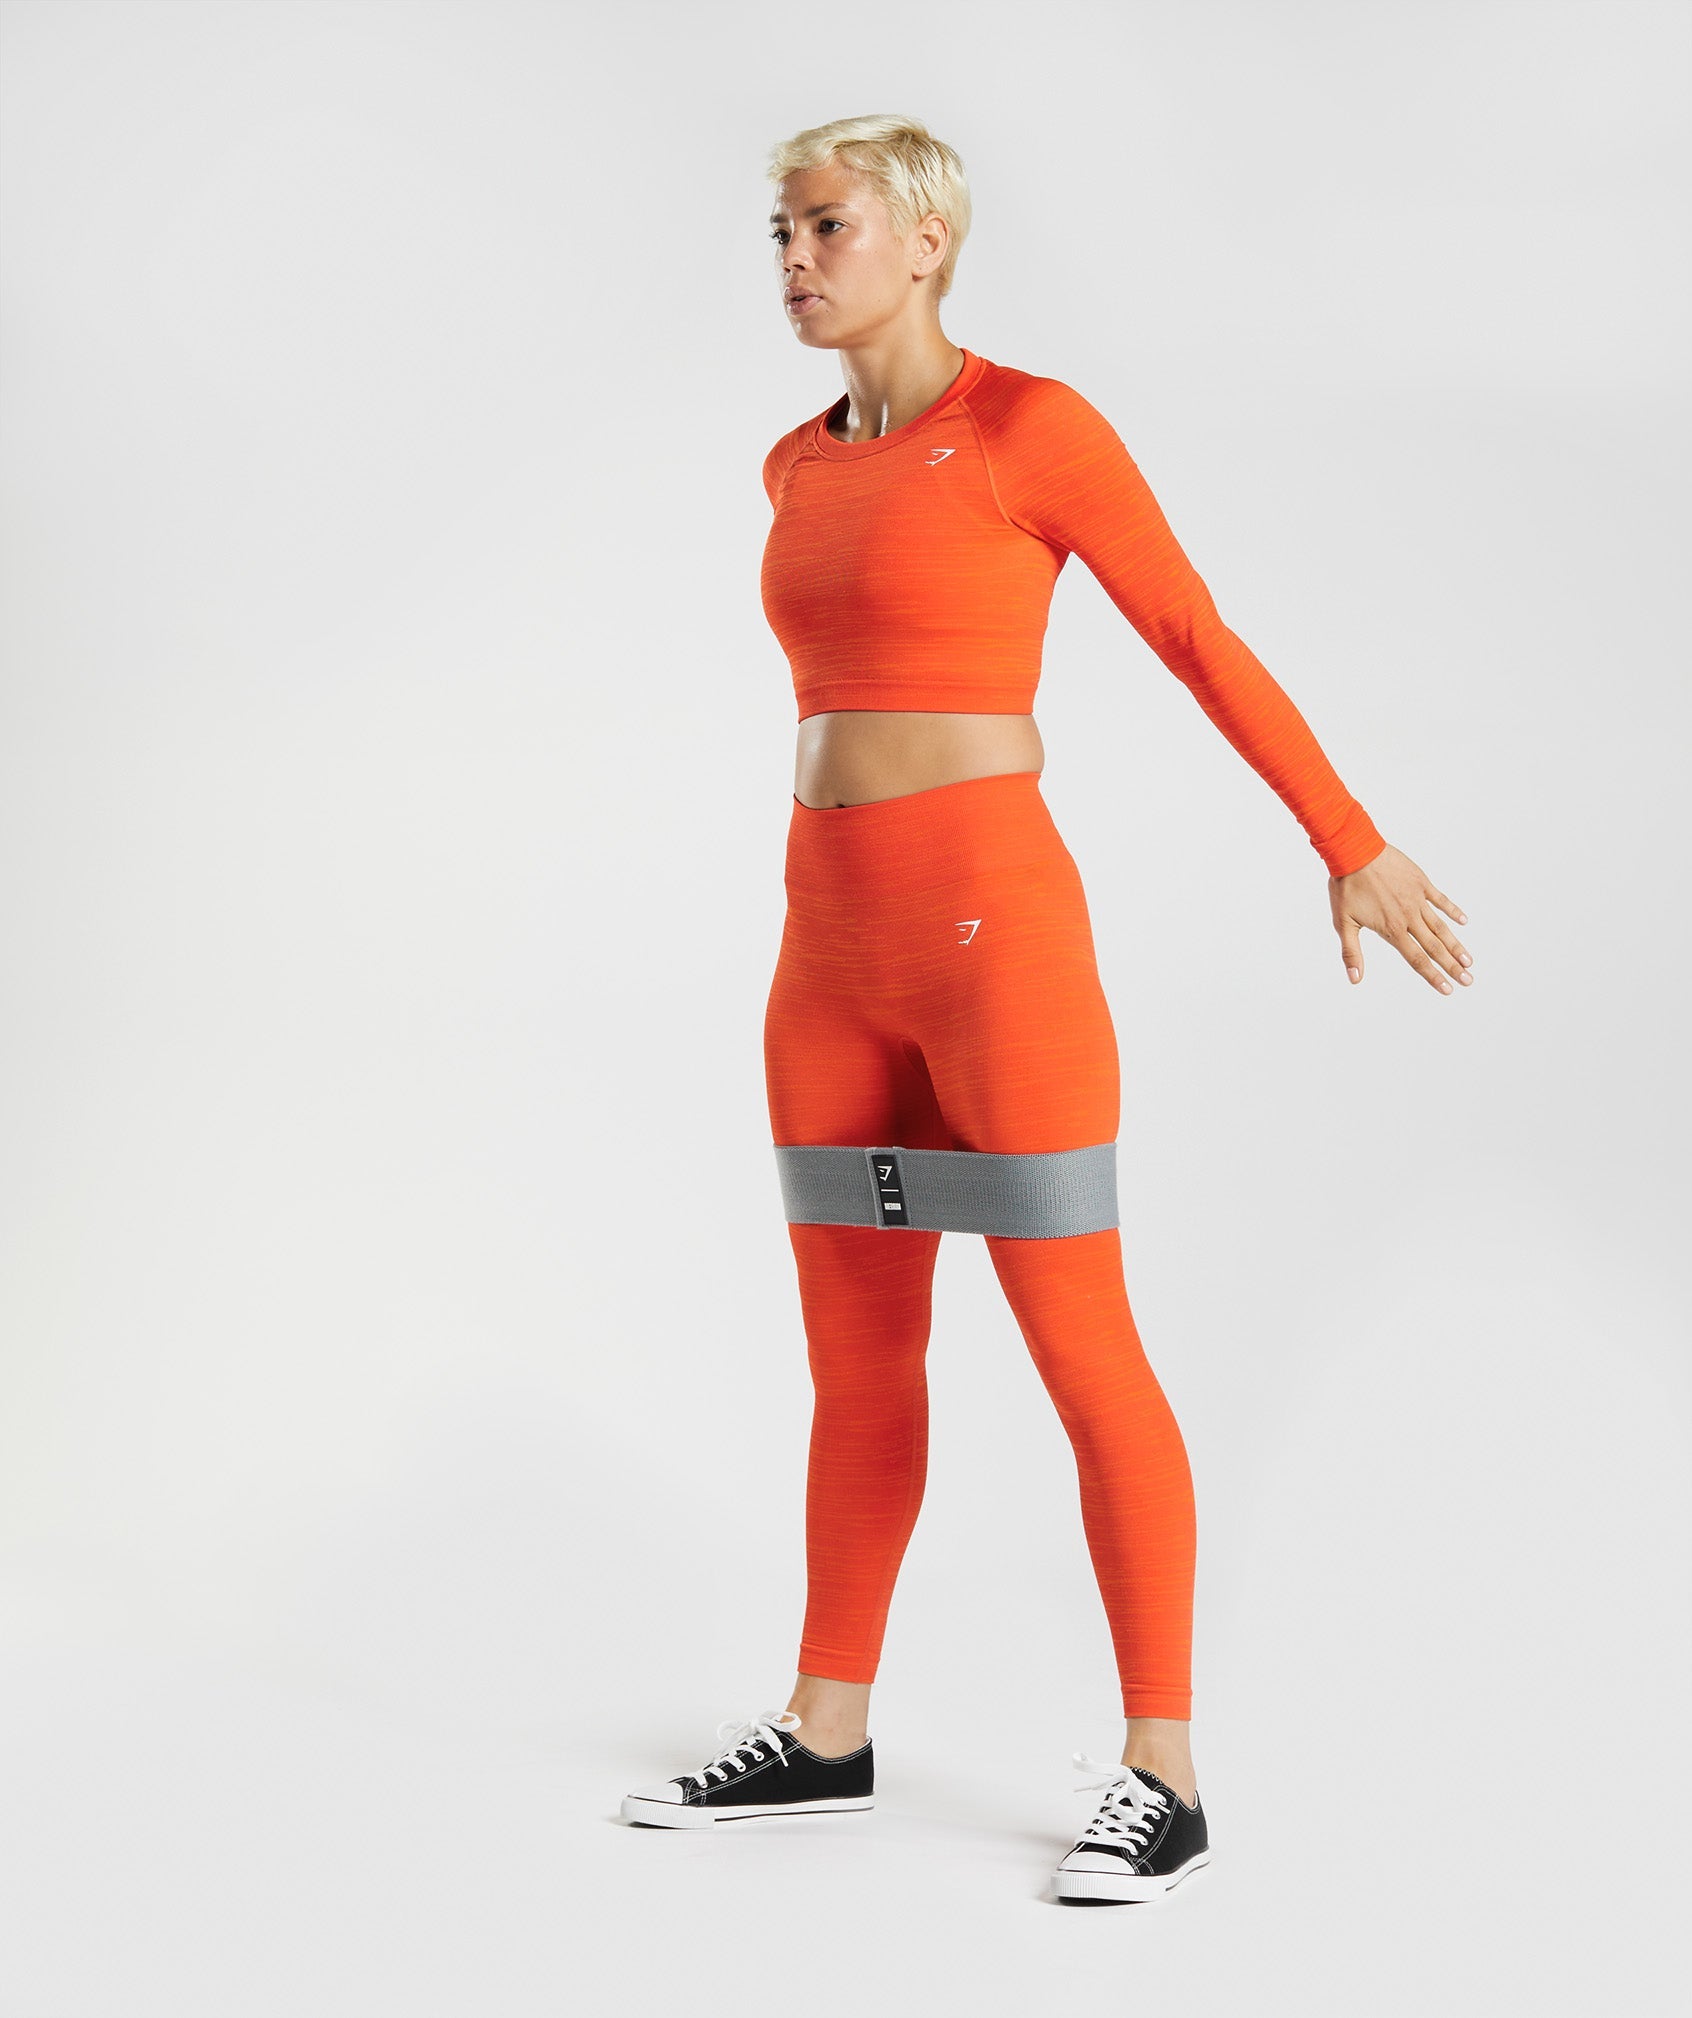 Lole Orange Red Long Sleeve Athletic Top Activewear Comfy Casual Size Small  - $25 - From Charelle